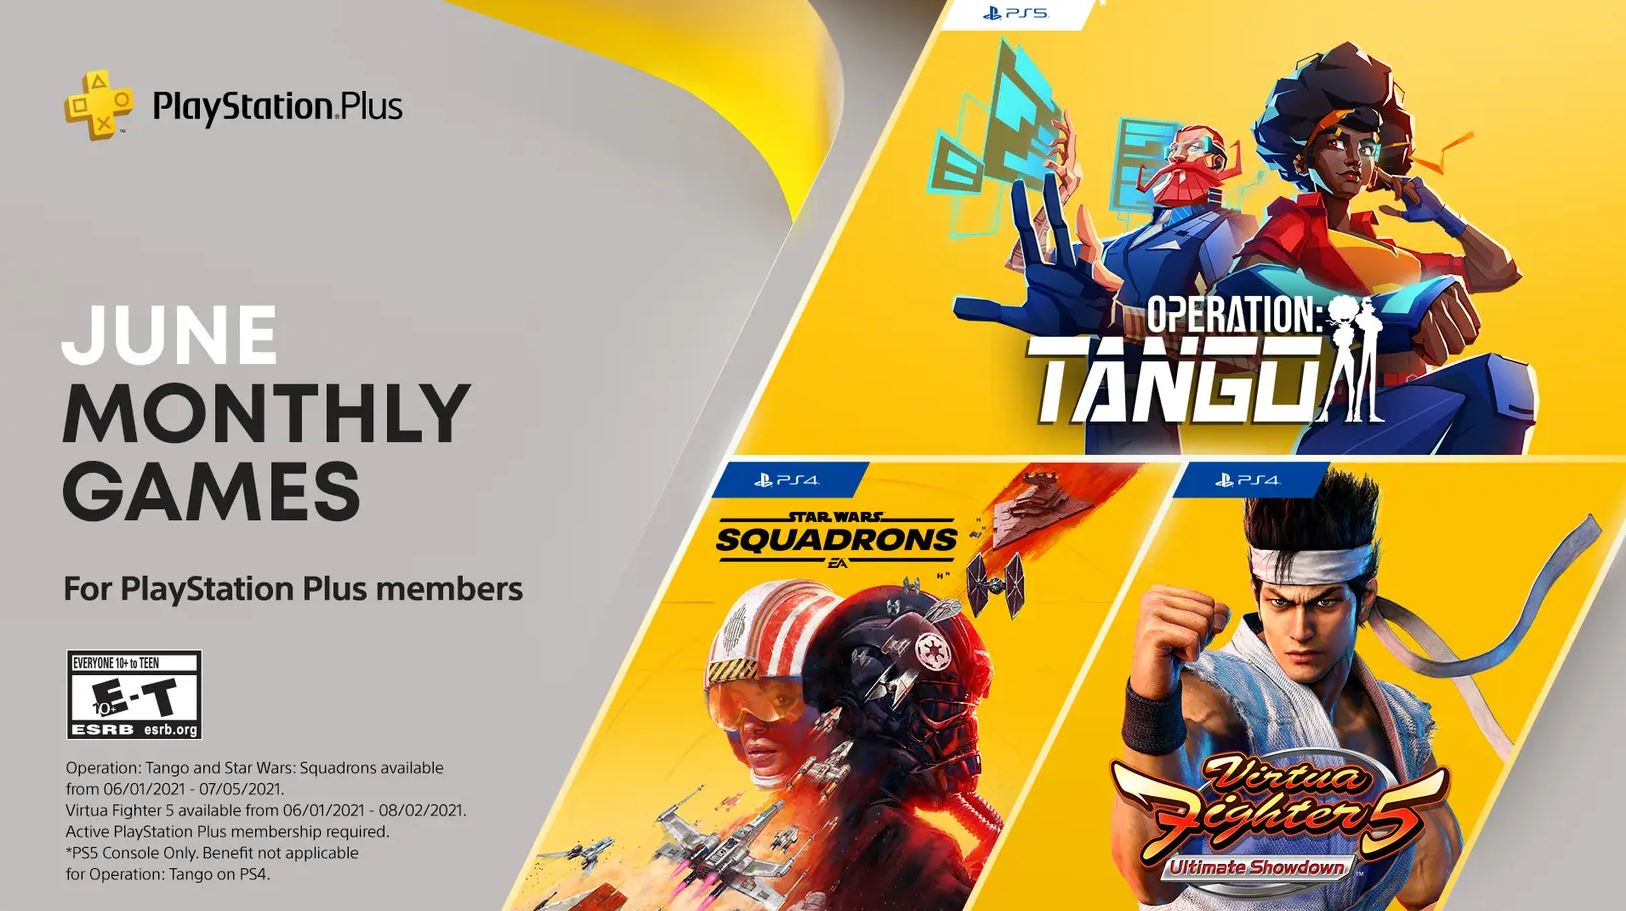 PlayStation Plus PS4, PS5 Free Games June 2021 Now Available